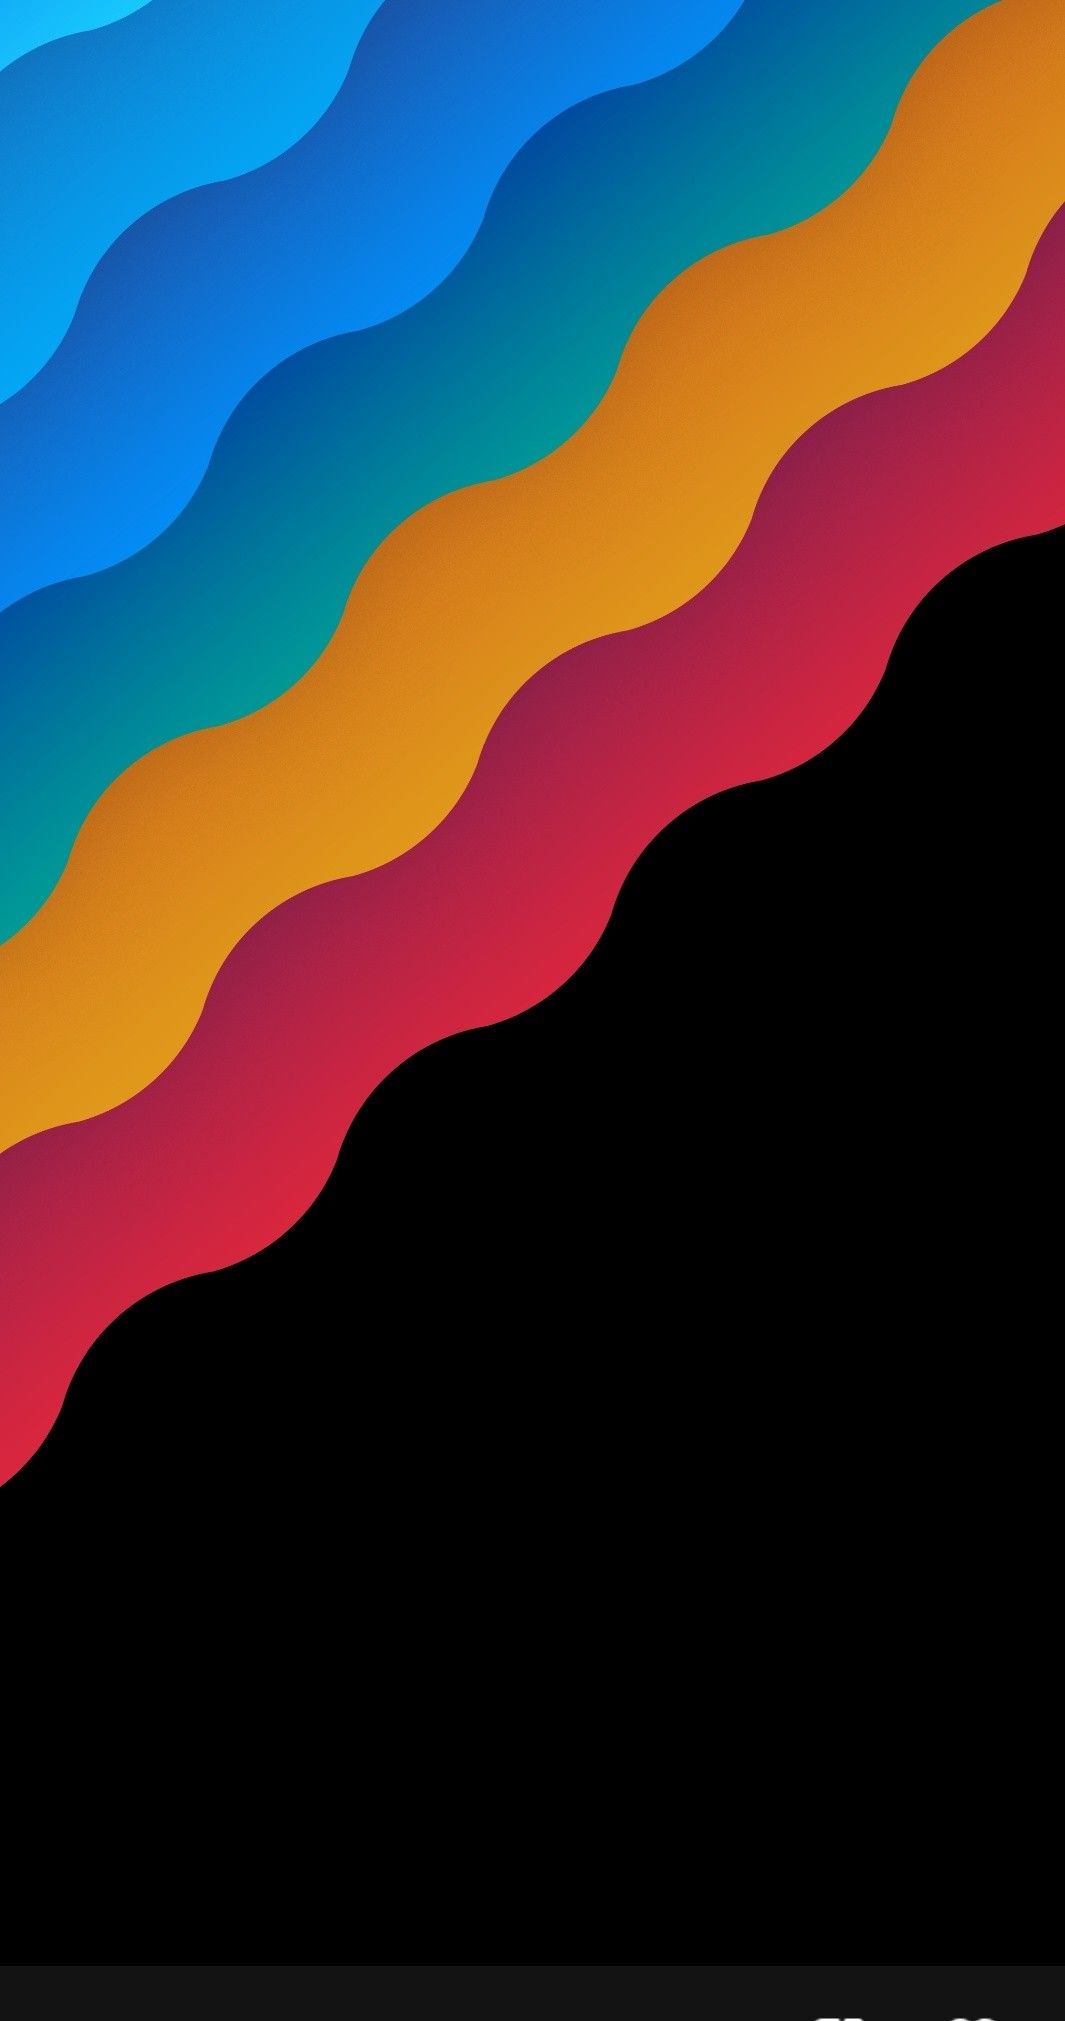 Amoled Colorful Wave Wallpapers